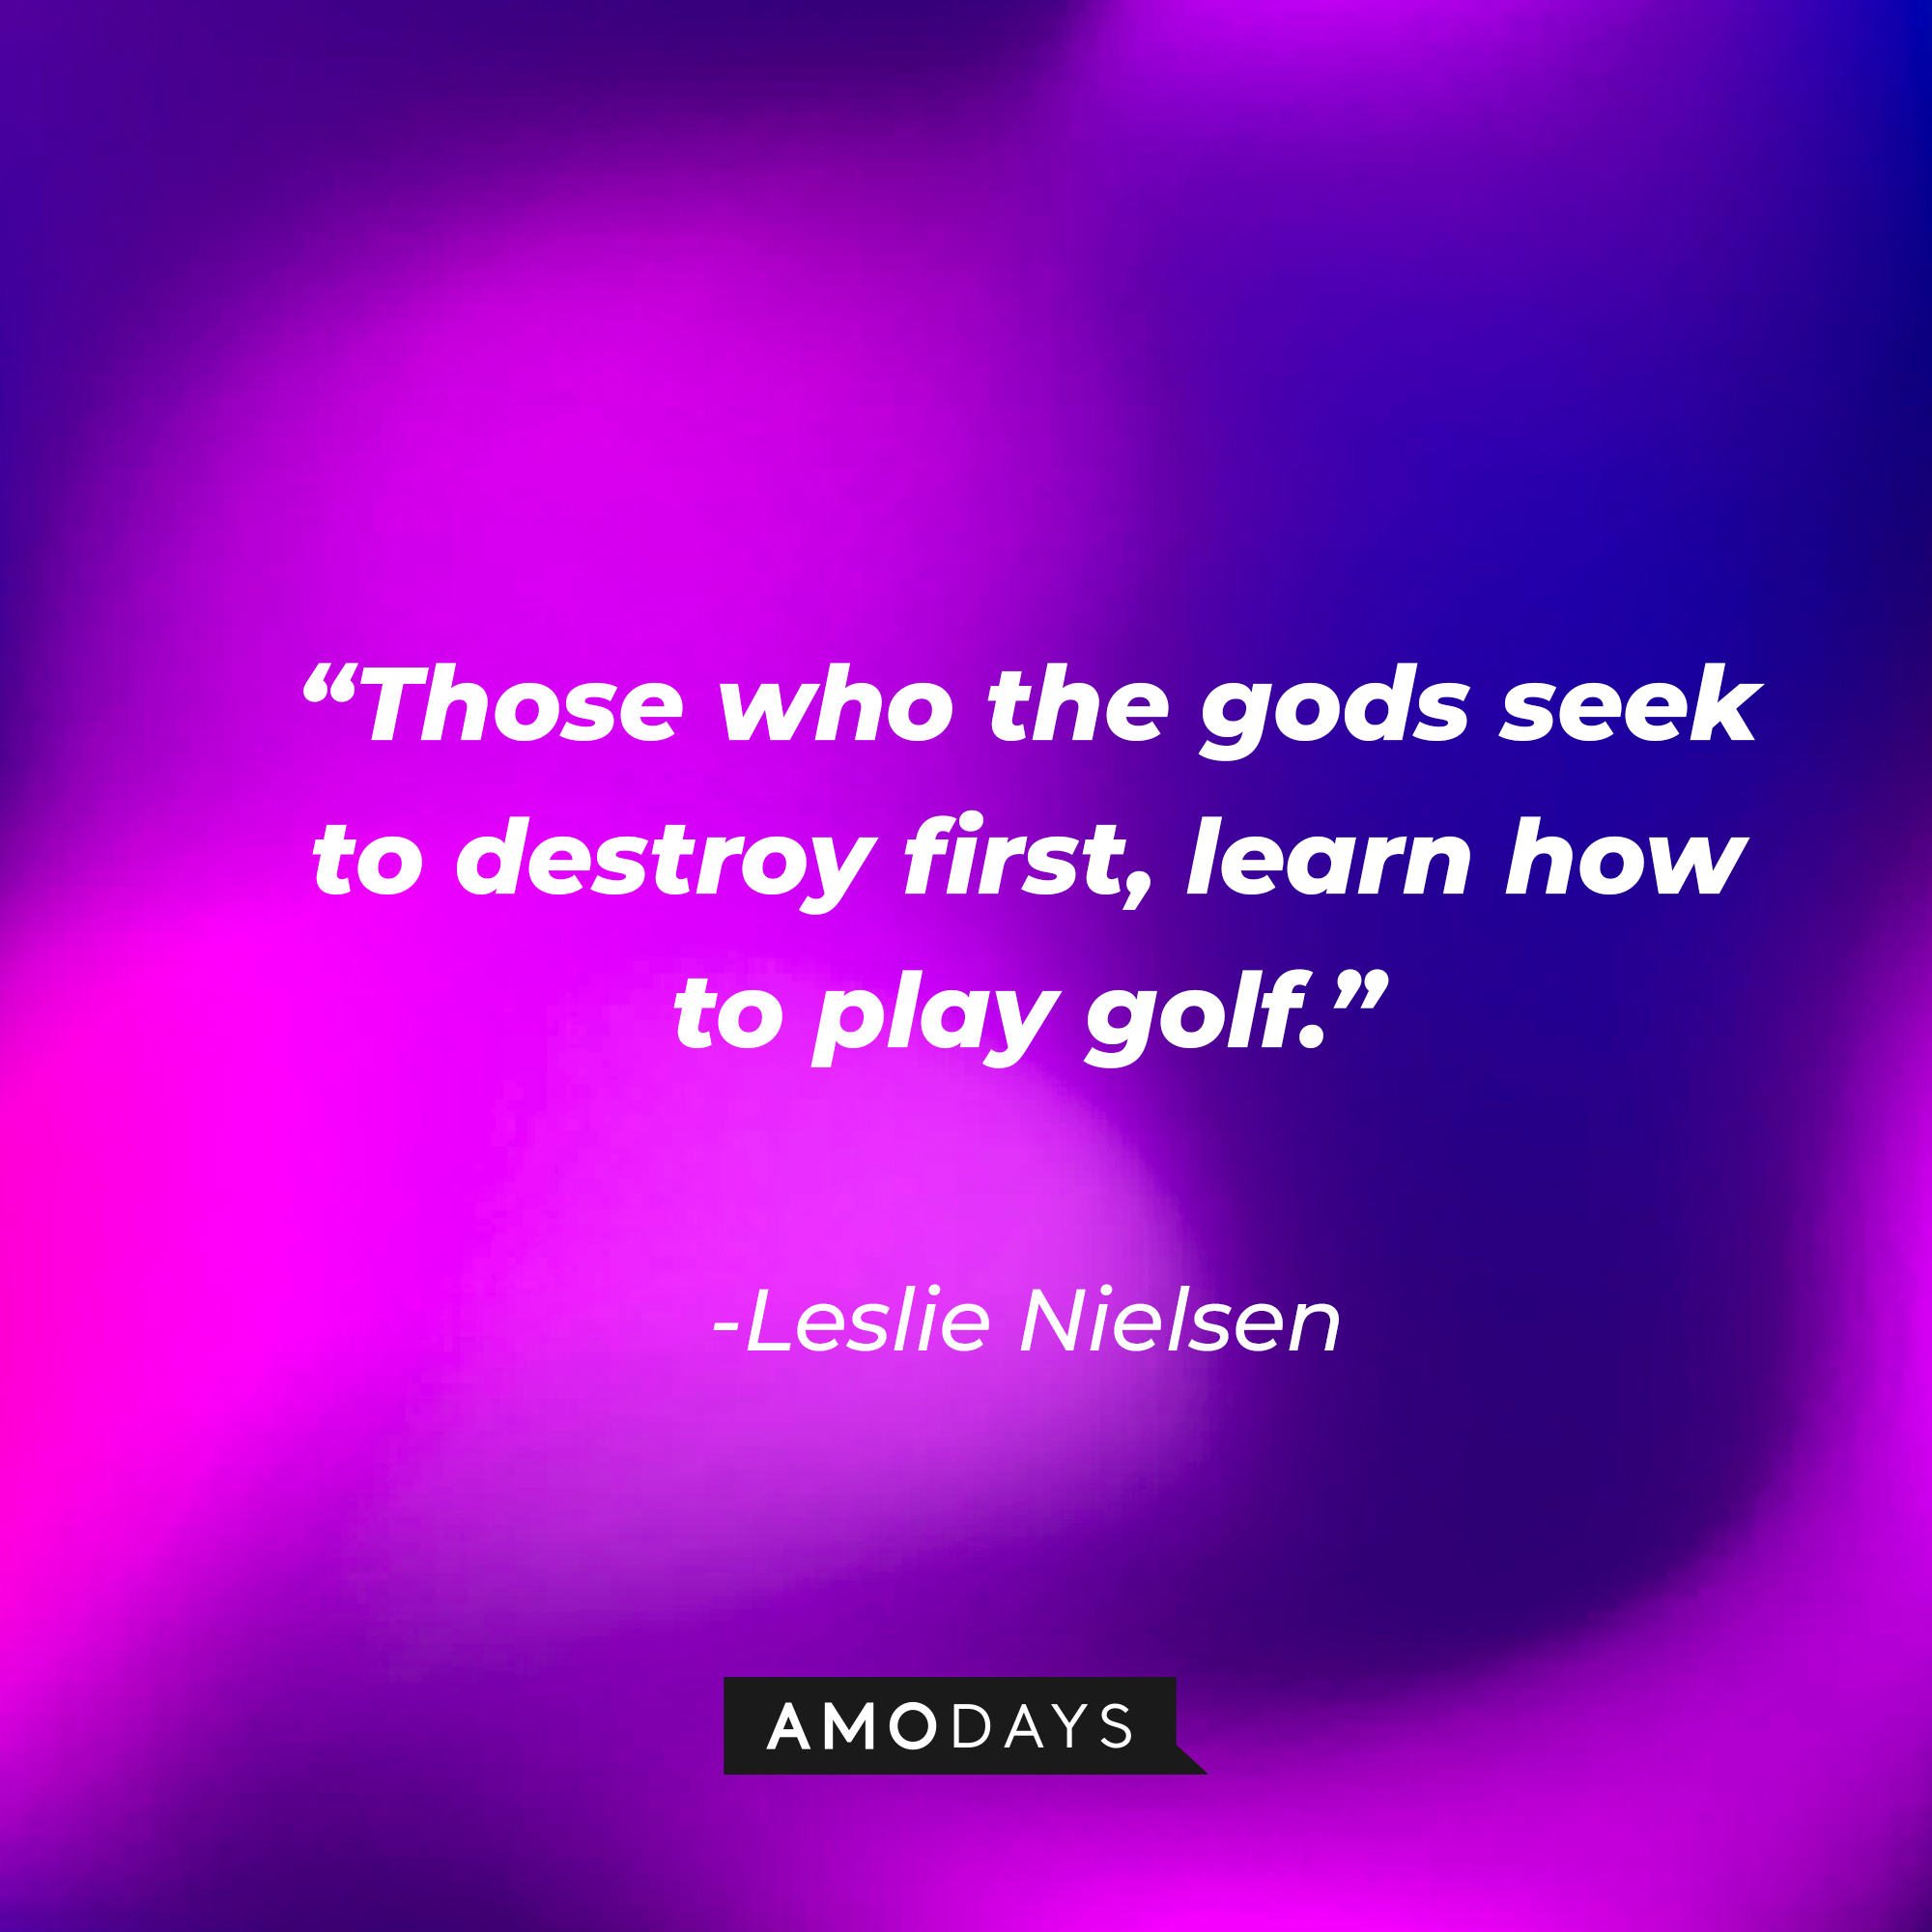 Leslie Nielsen's quote: "Those who the gods seek to destroy first, learn how to play golf." | Source: Amodays